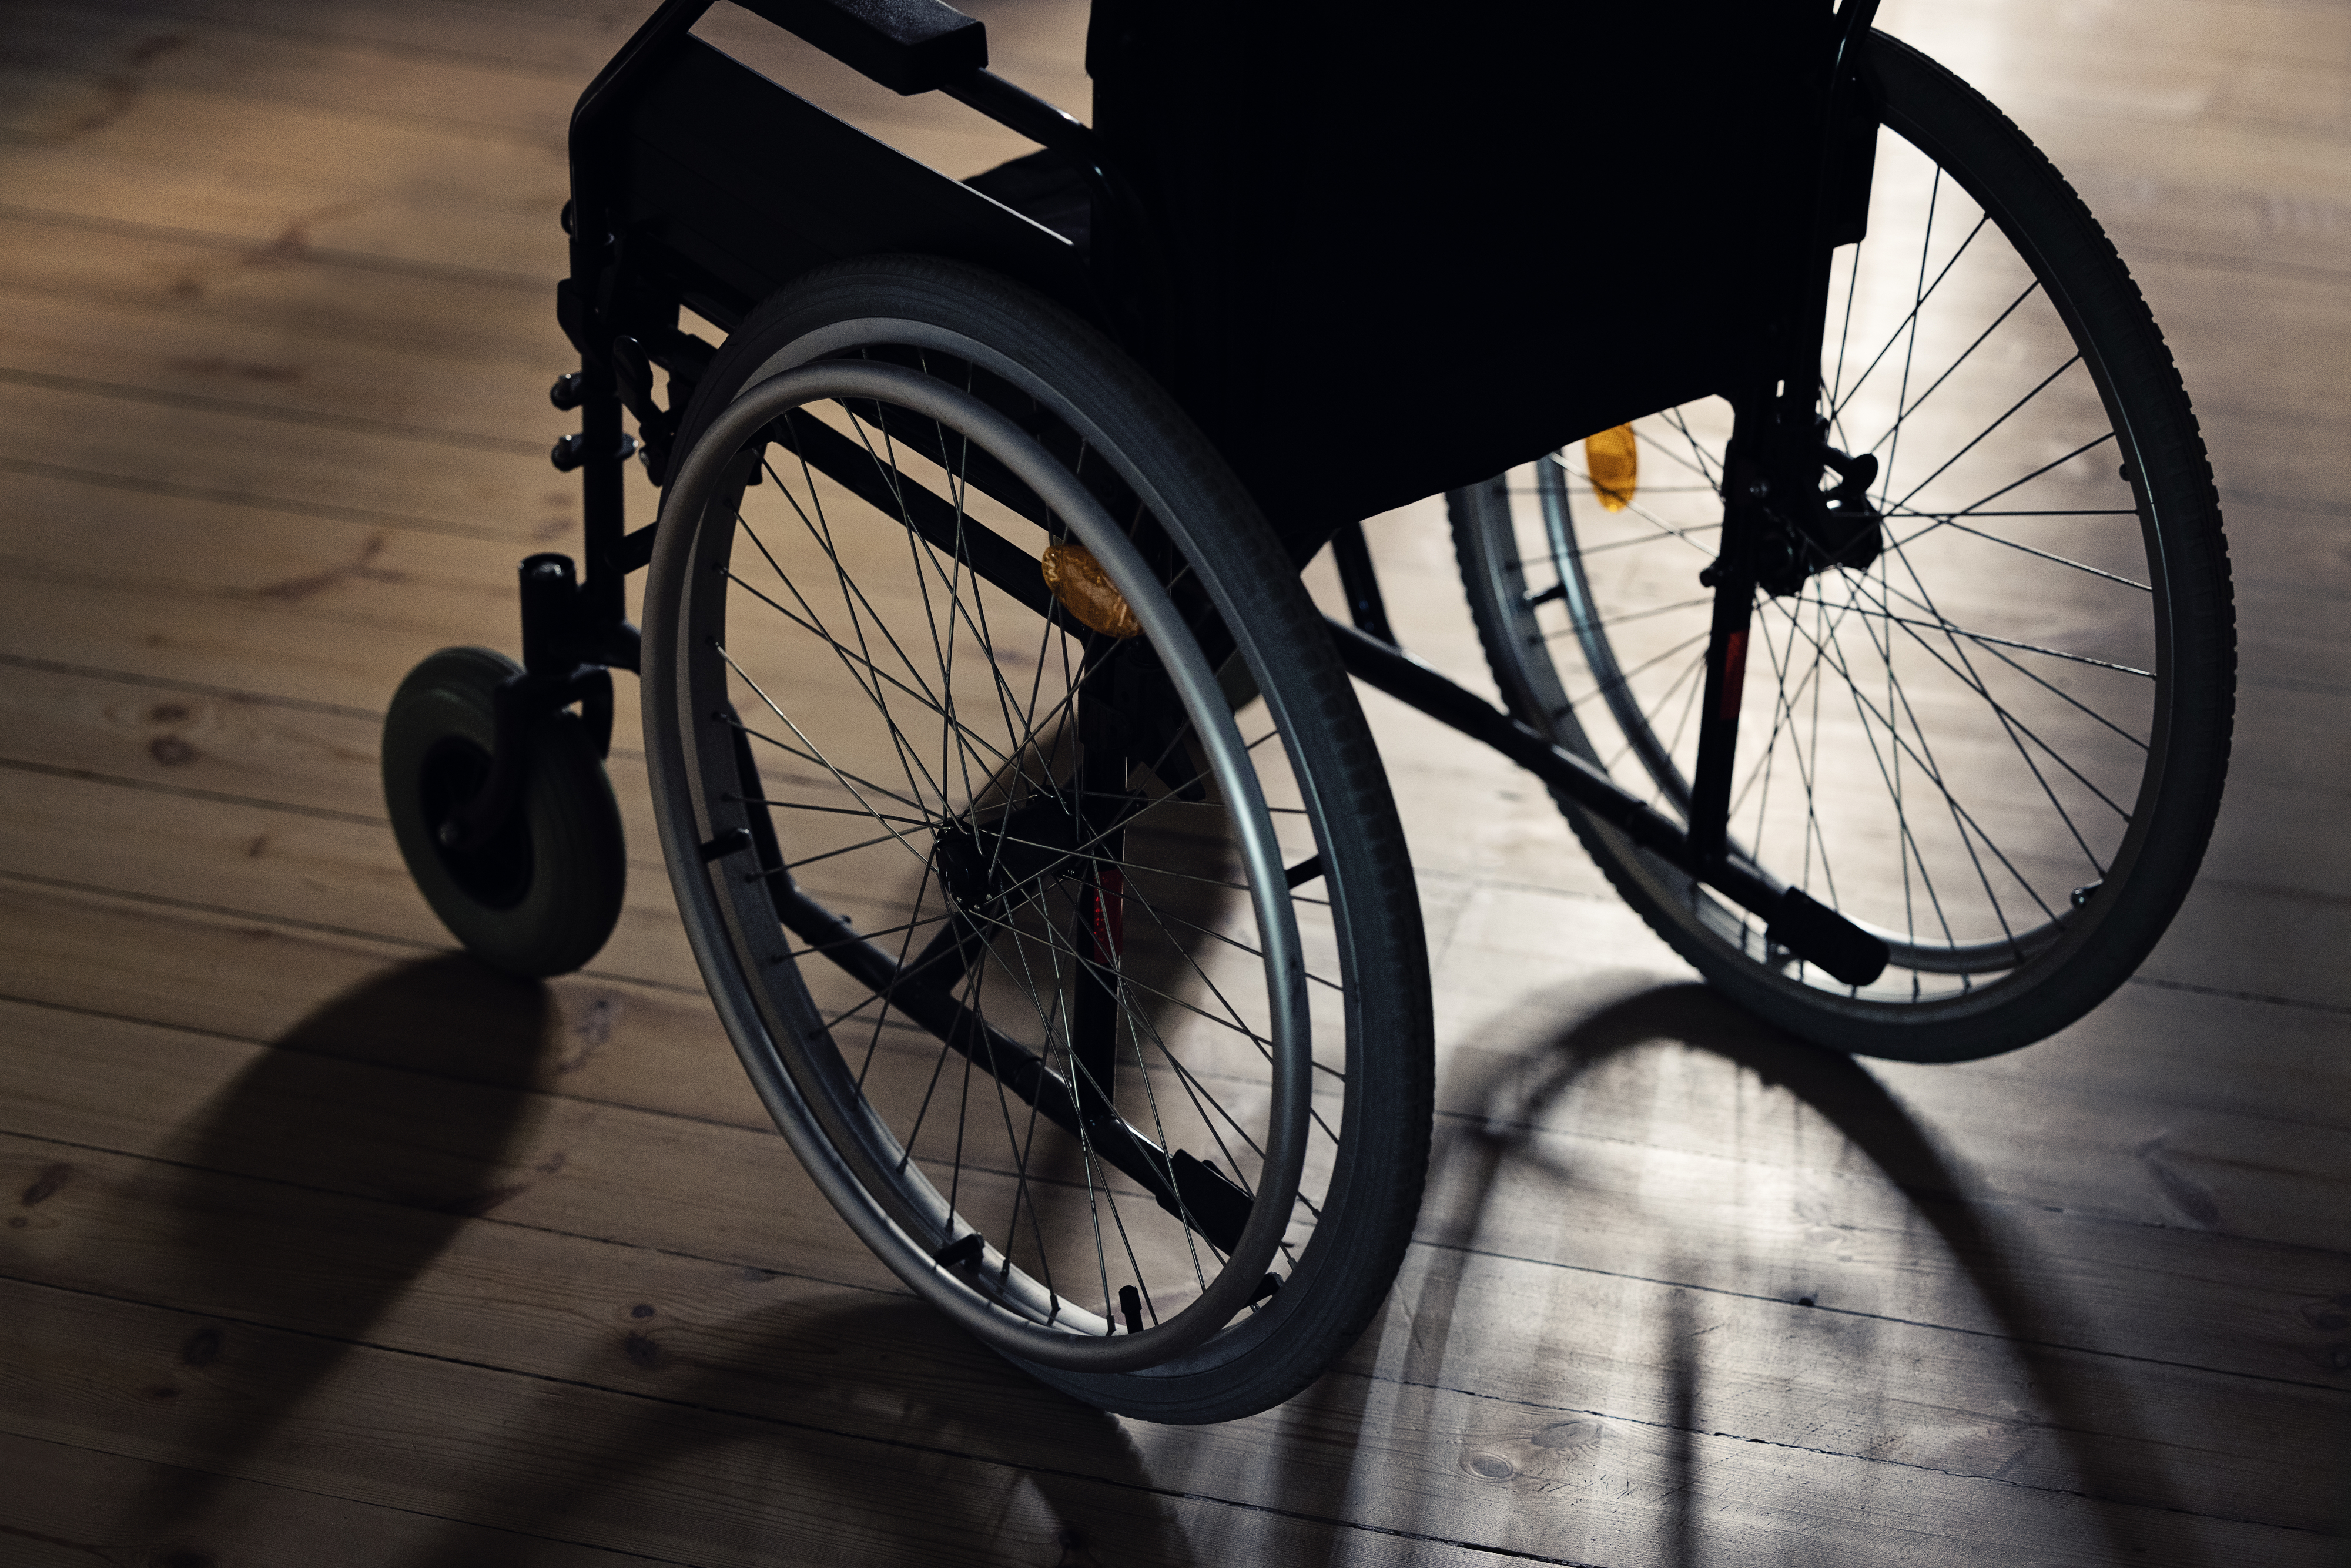 A lone wheelchair is depicted on a wooden floor, with light casting shadows through the spokes of the wheels. No people are in the image